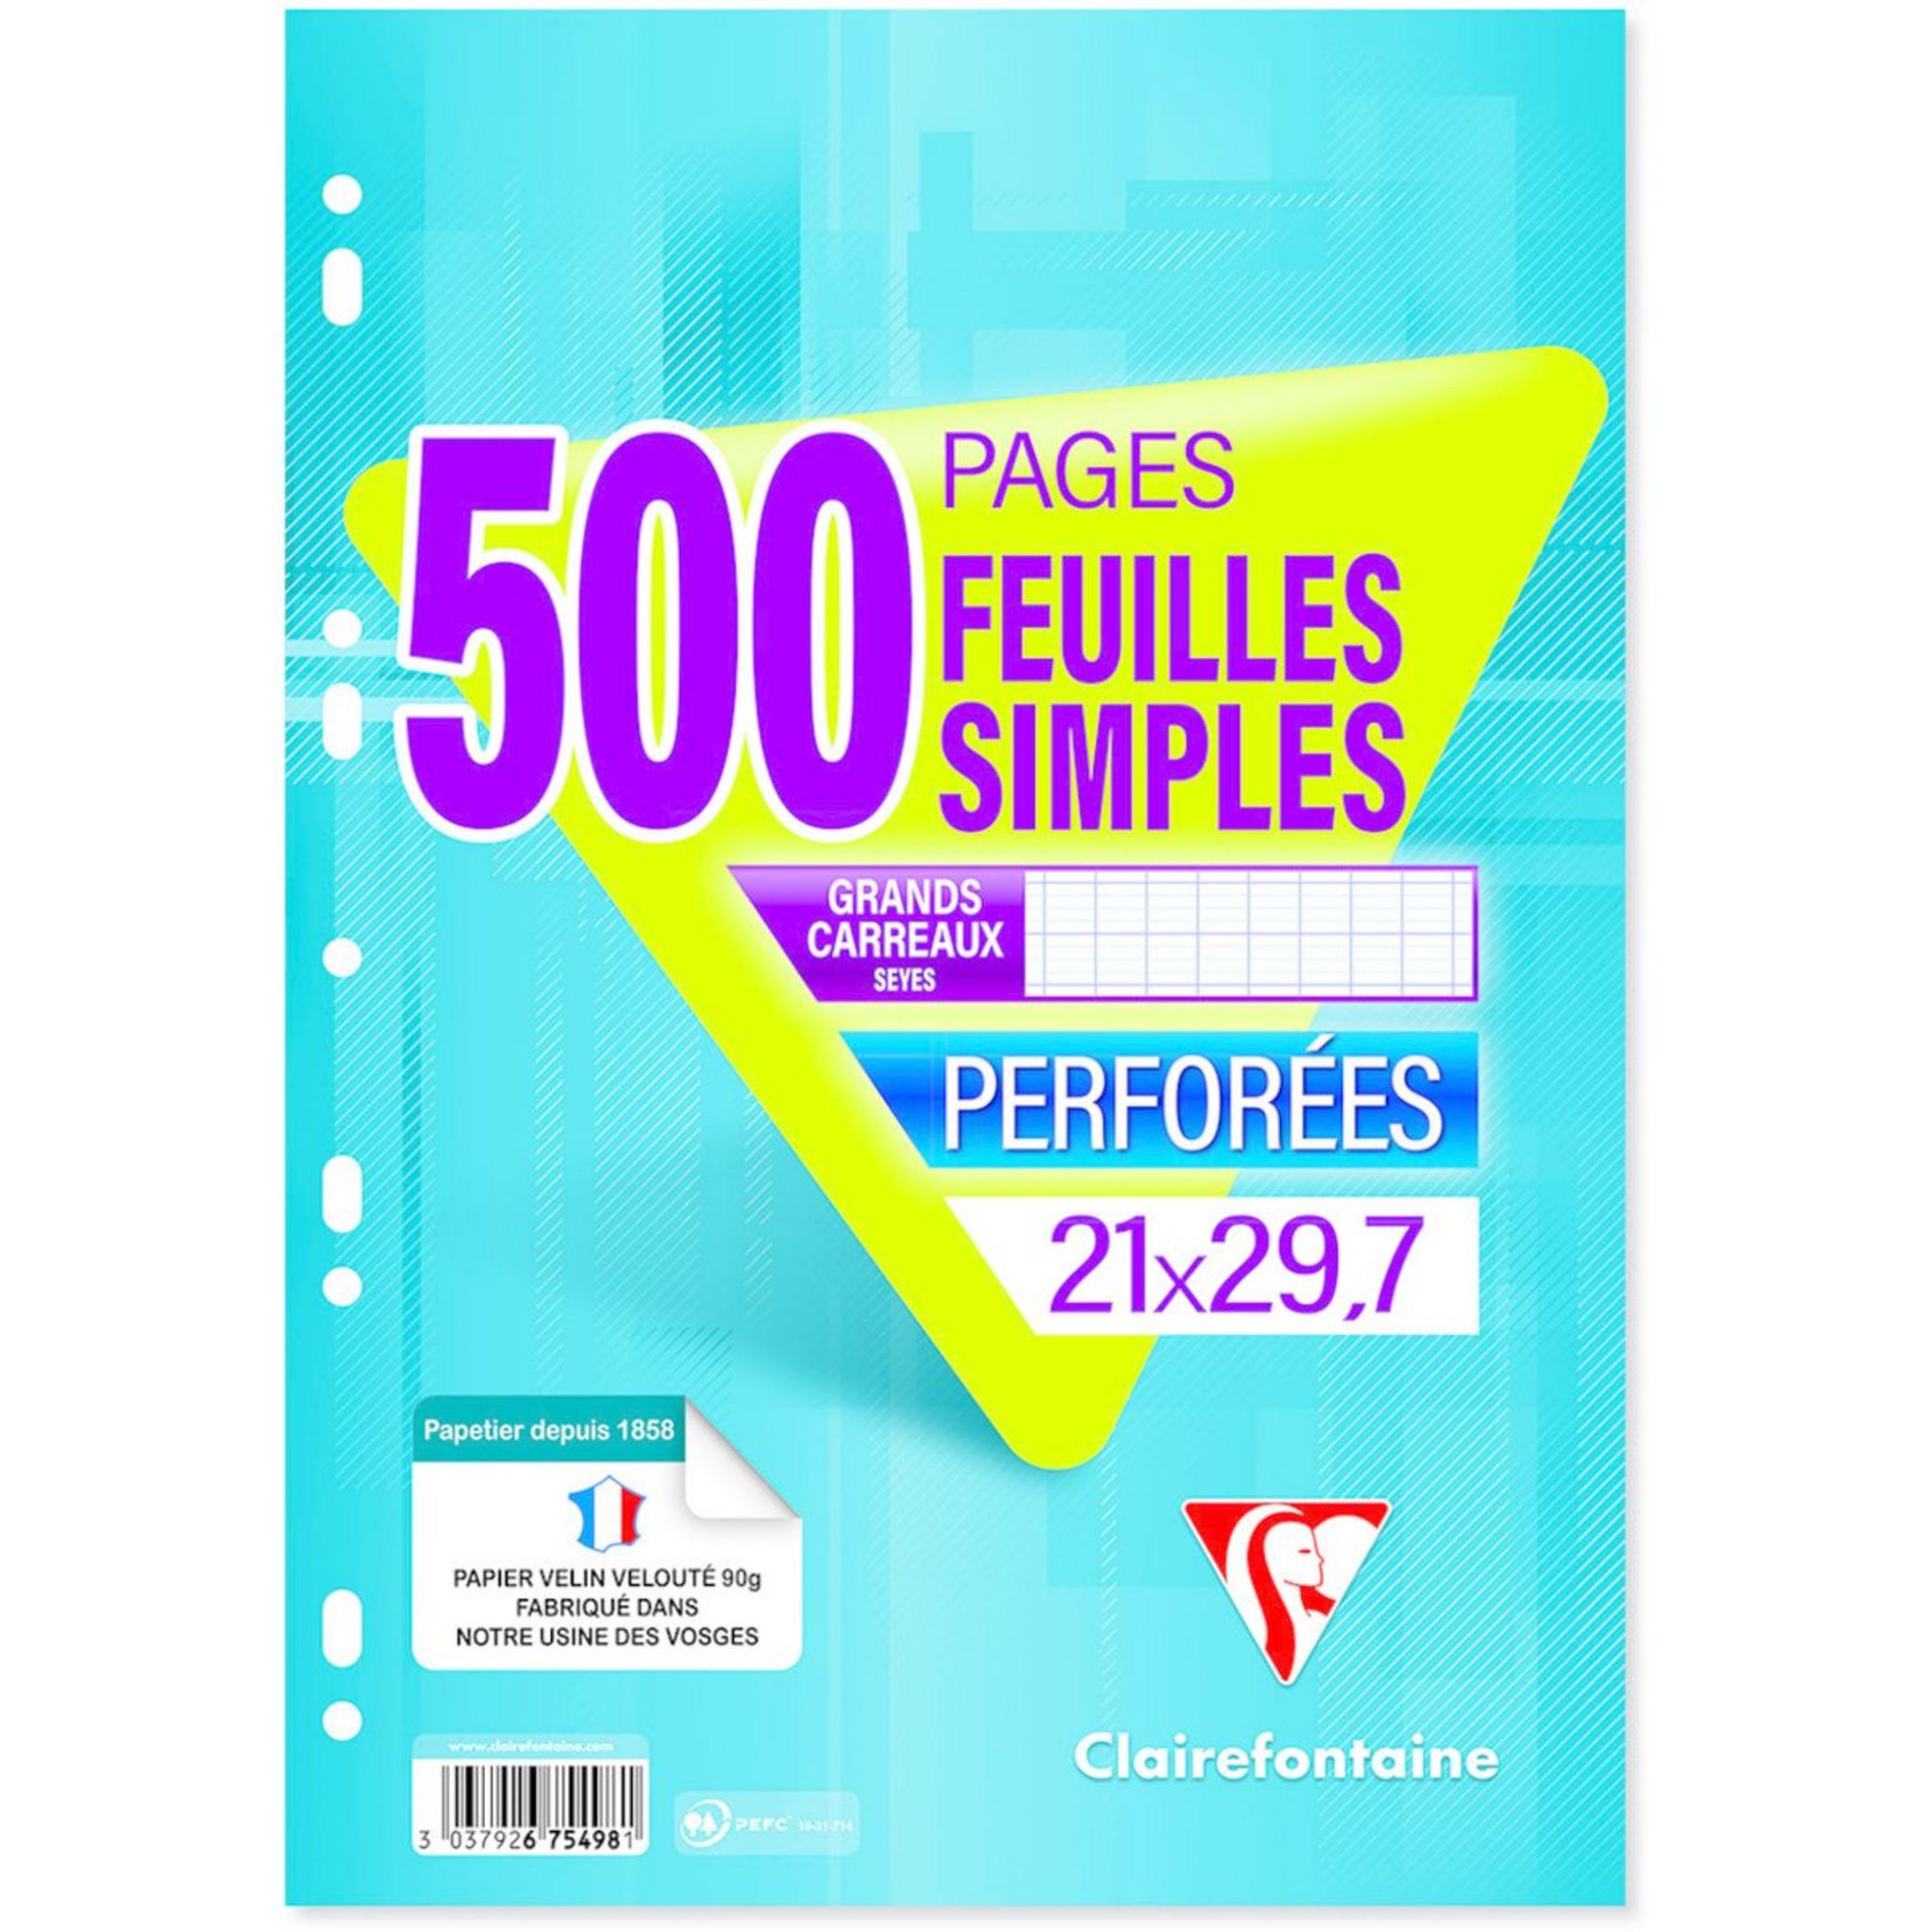 CLAIREFONTAINE Feuilles simples 500 pages 21x29.7cm grands